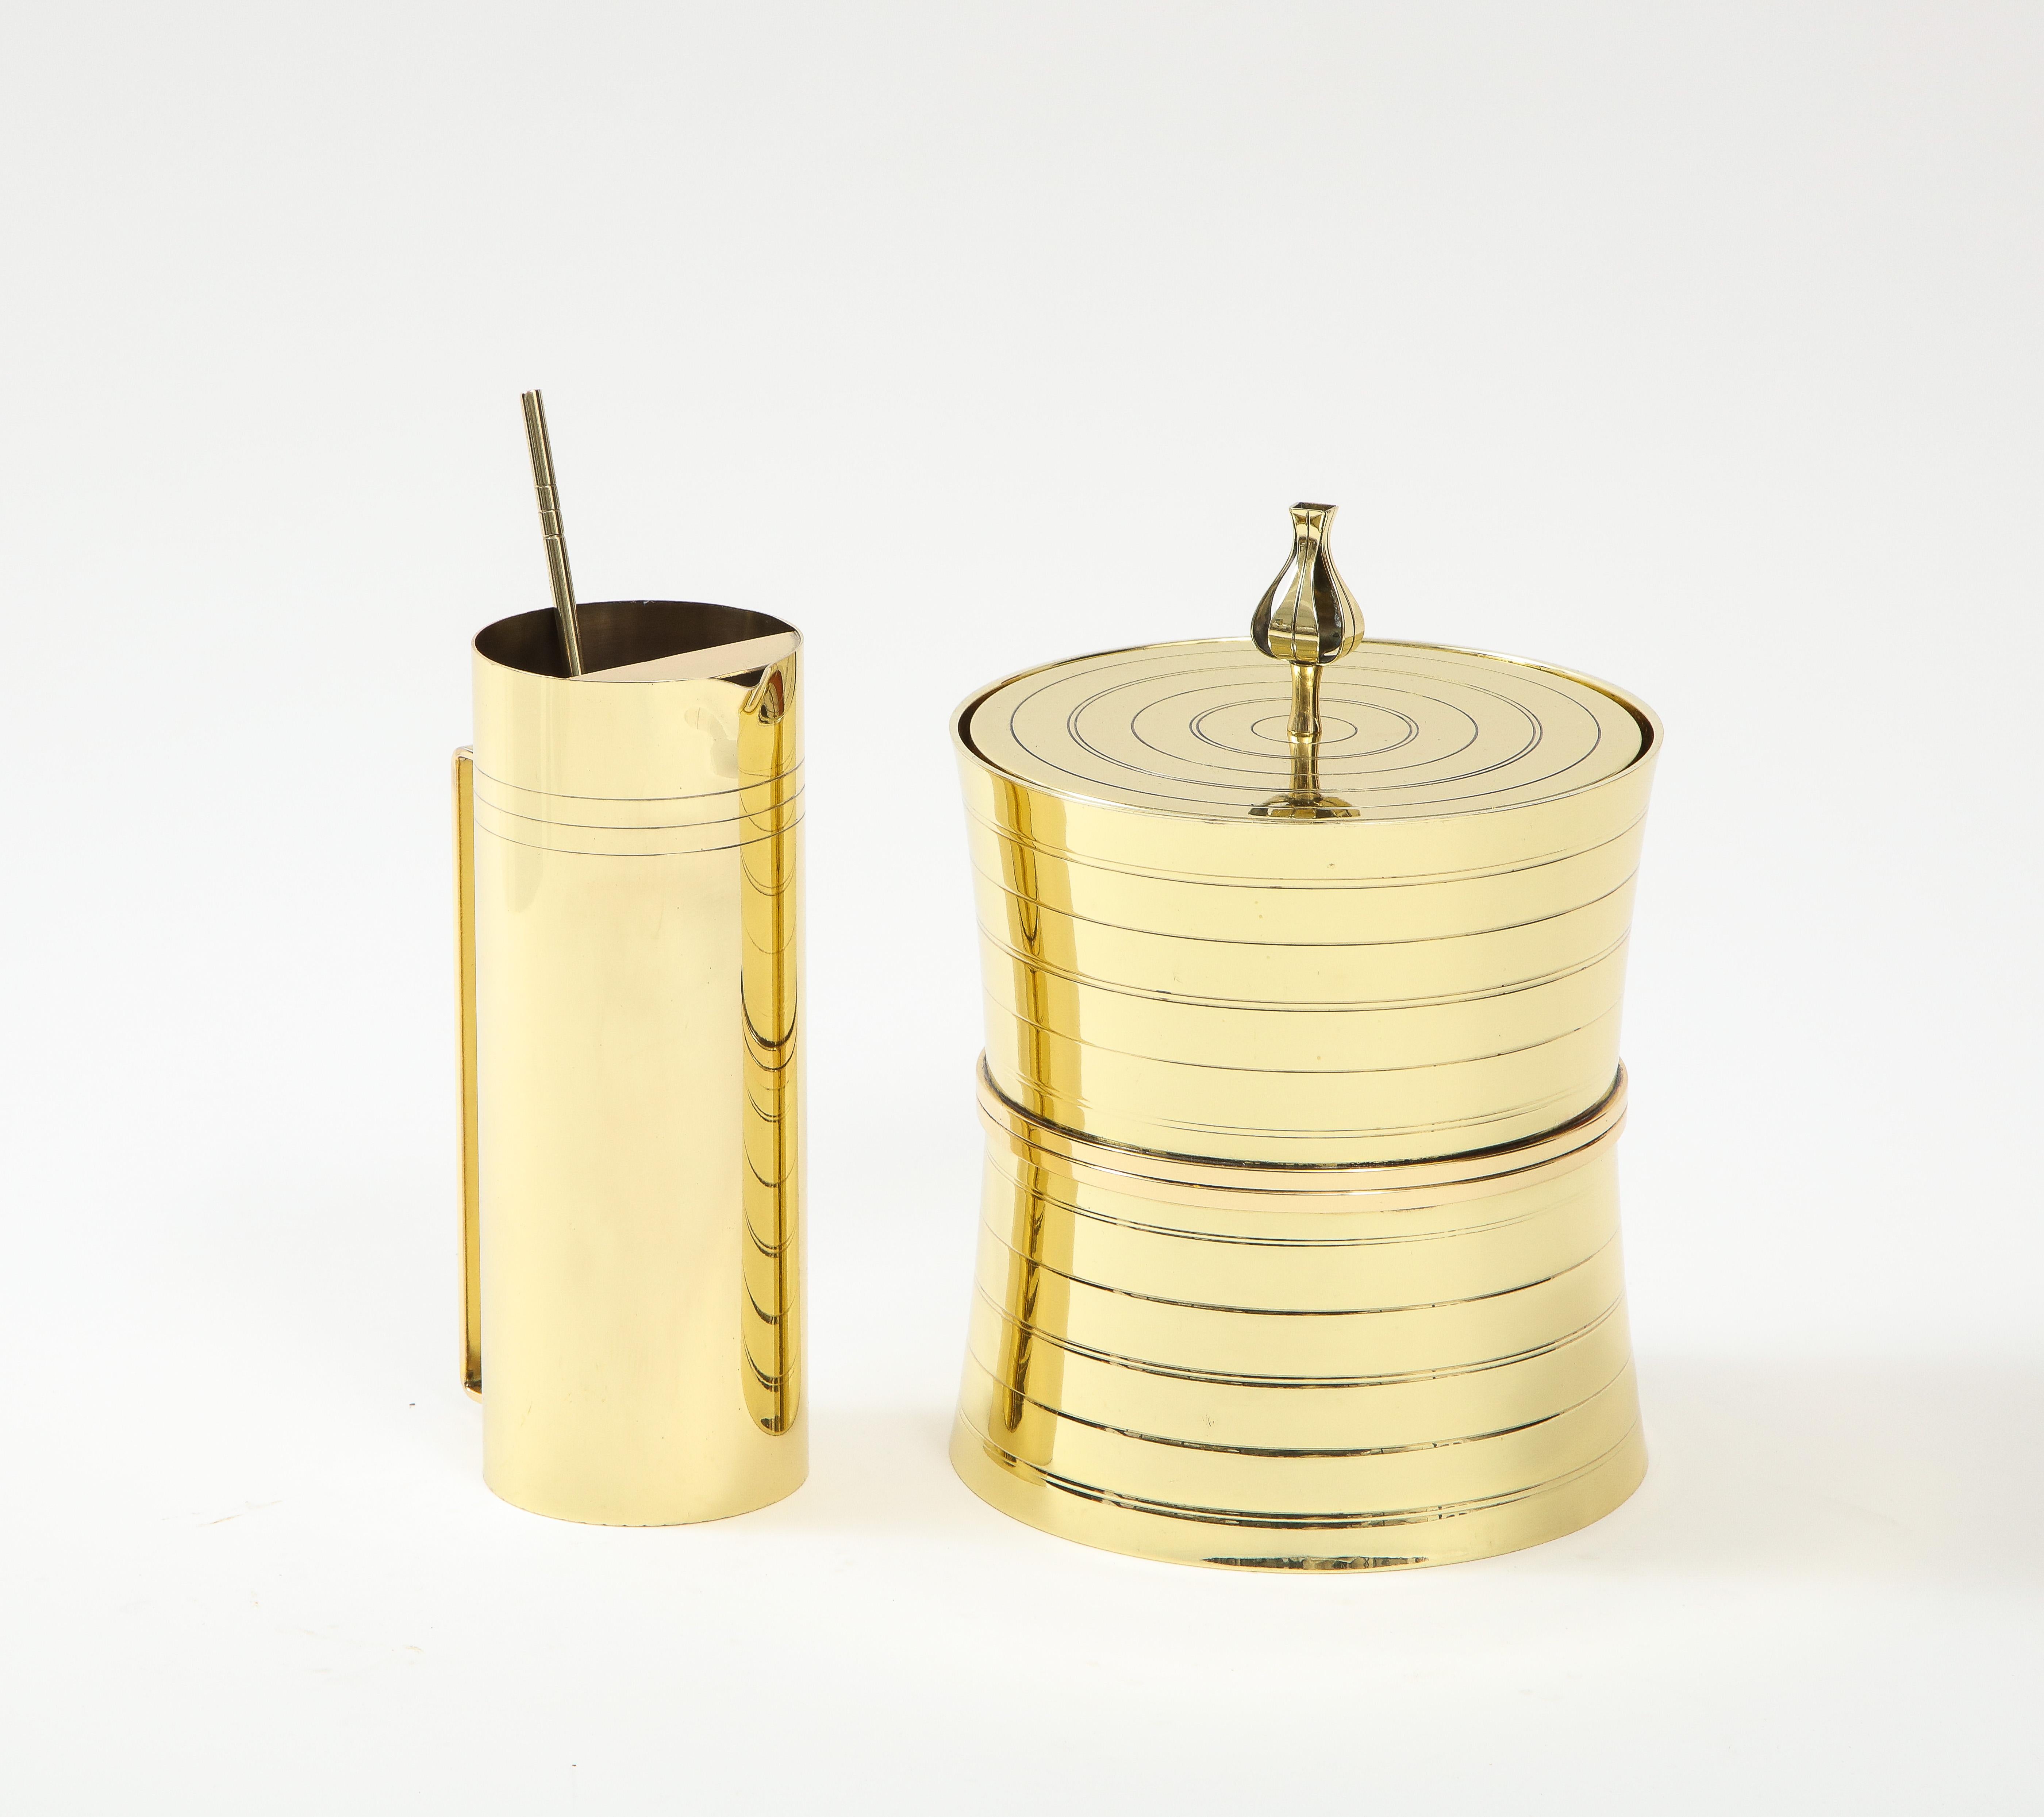 Modernist Tommi Parzinger brass ice bucket and martini pitcher with stirrer, both featuring engine turned pinstripe details. Stamped. Ice Bucket retains its original Mercury Glass Thermos liner.

Ice Bucket measures 7.5